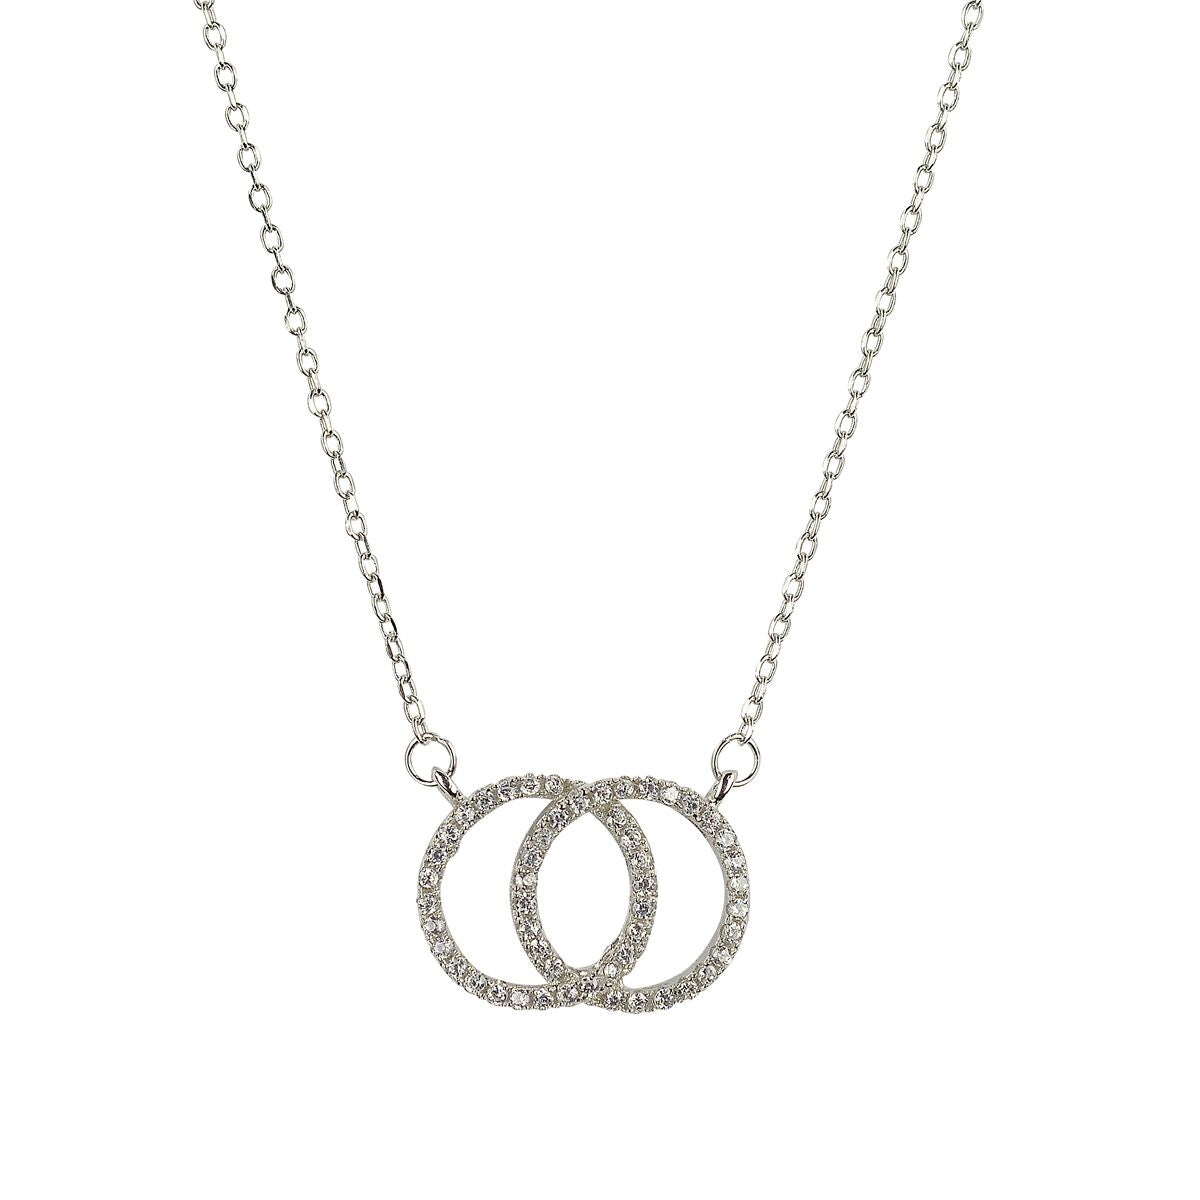 ETERNITY STERLING SILVER NECKLACE